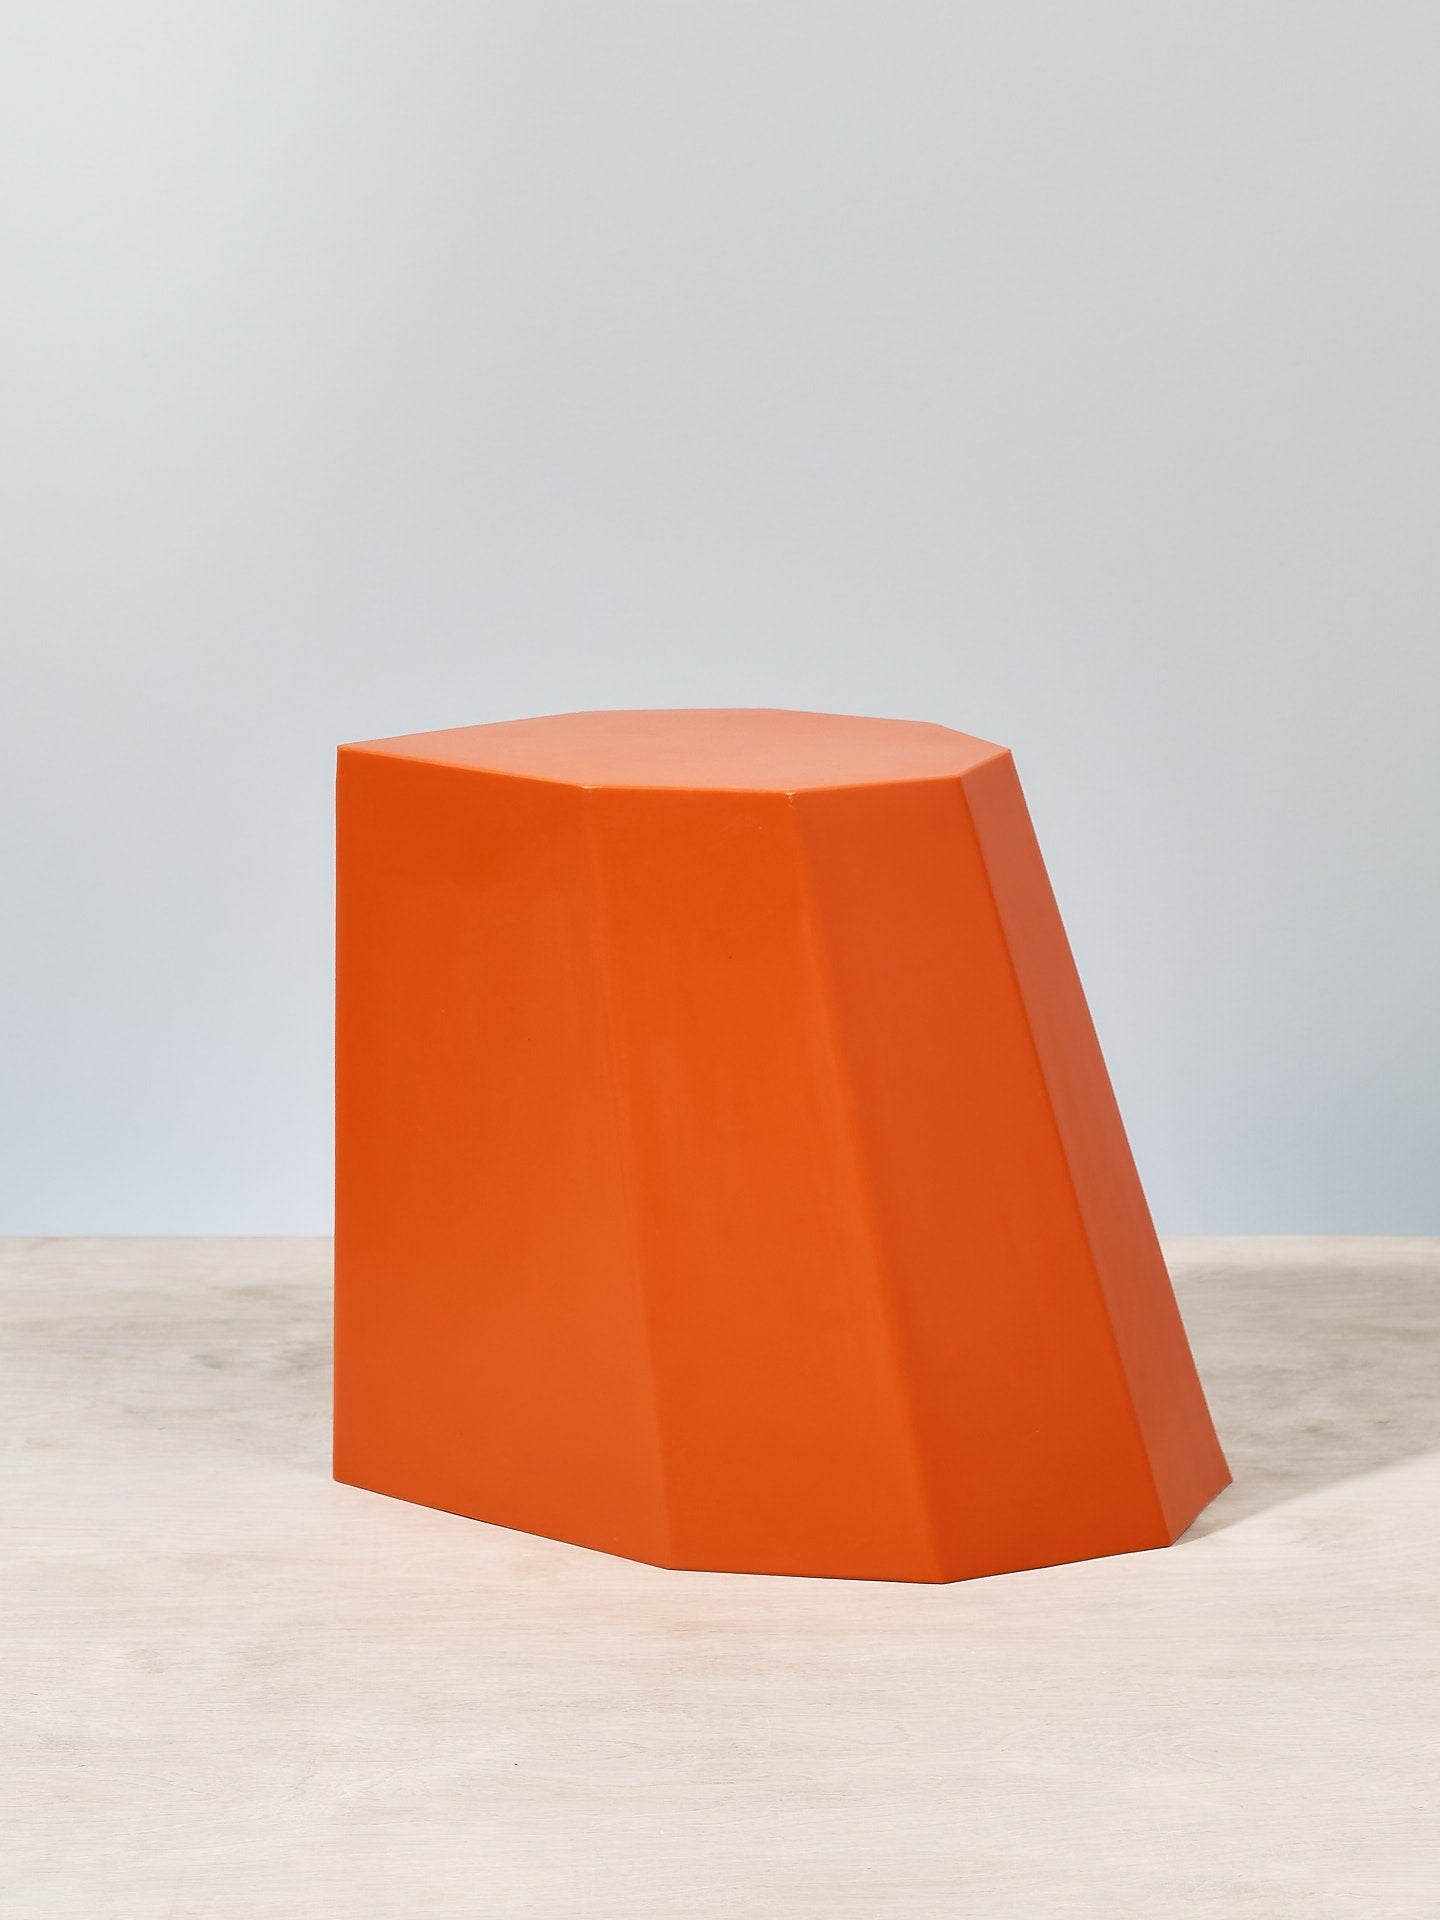 An Arnoldino stool – orange, made by Martino Gamper, sitting on top of a wooden table.